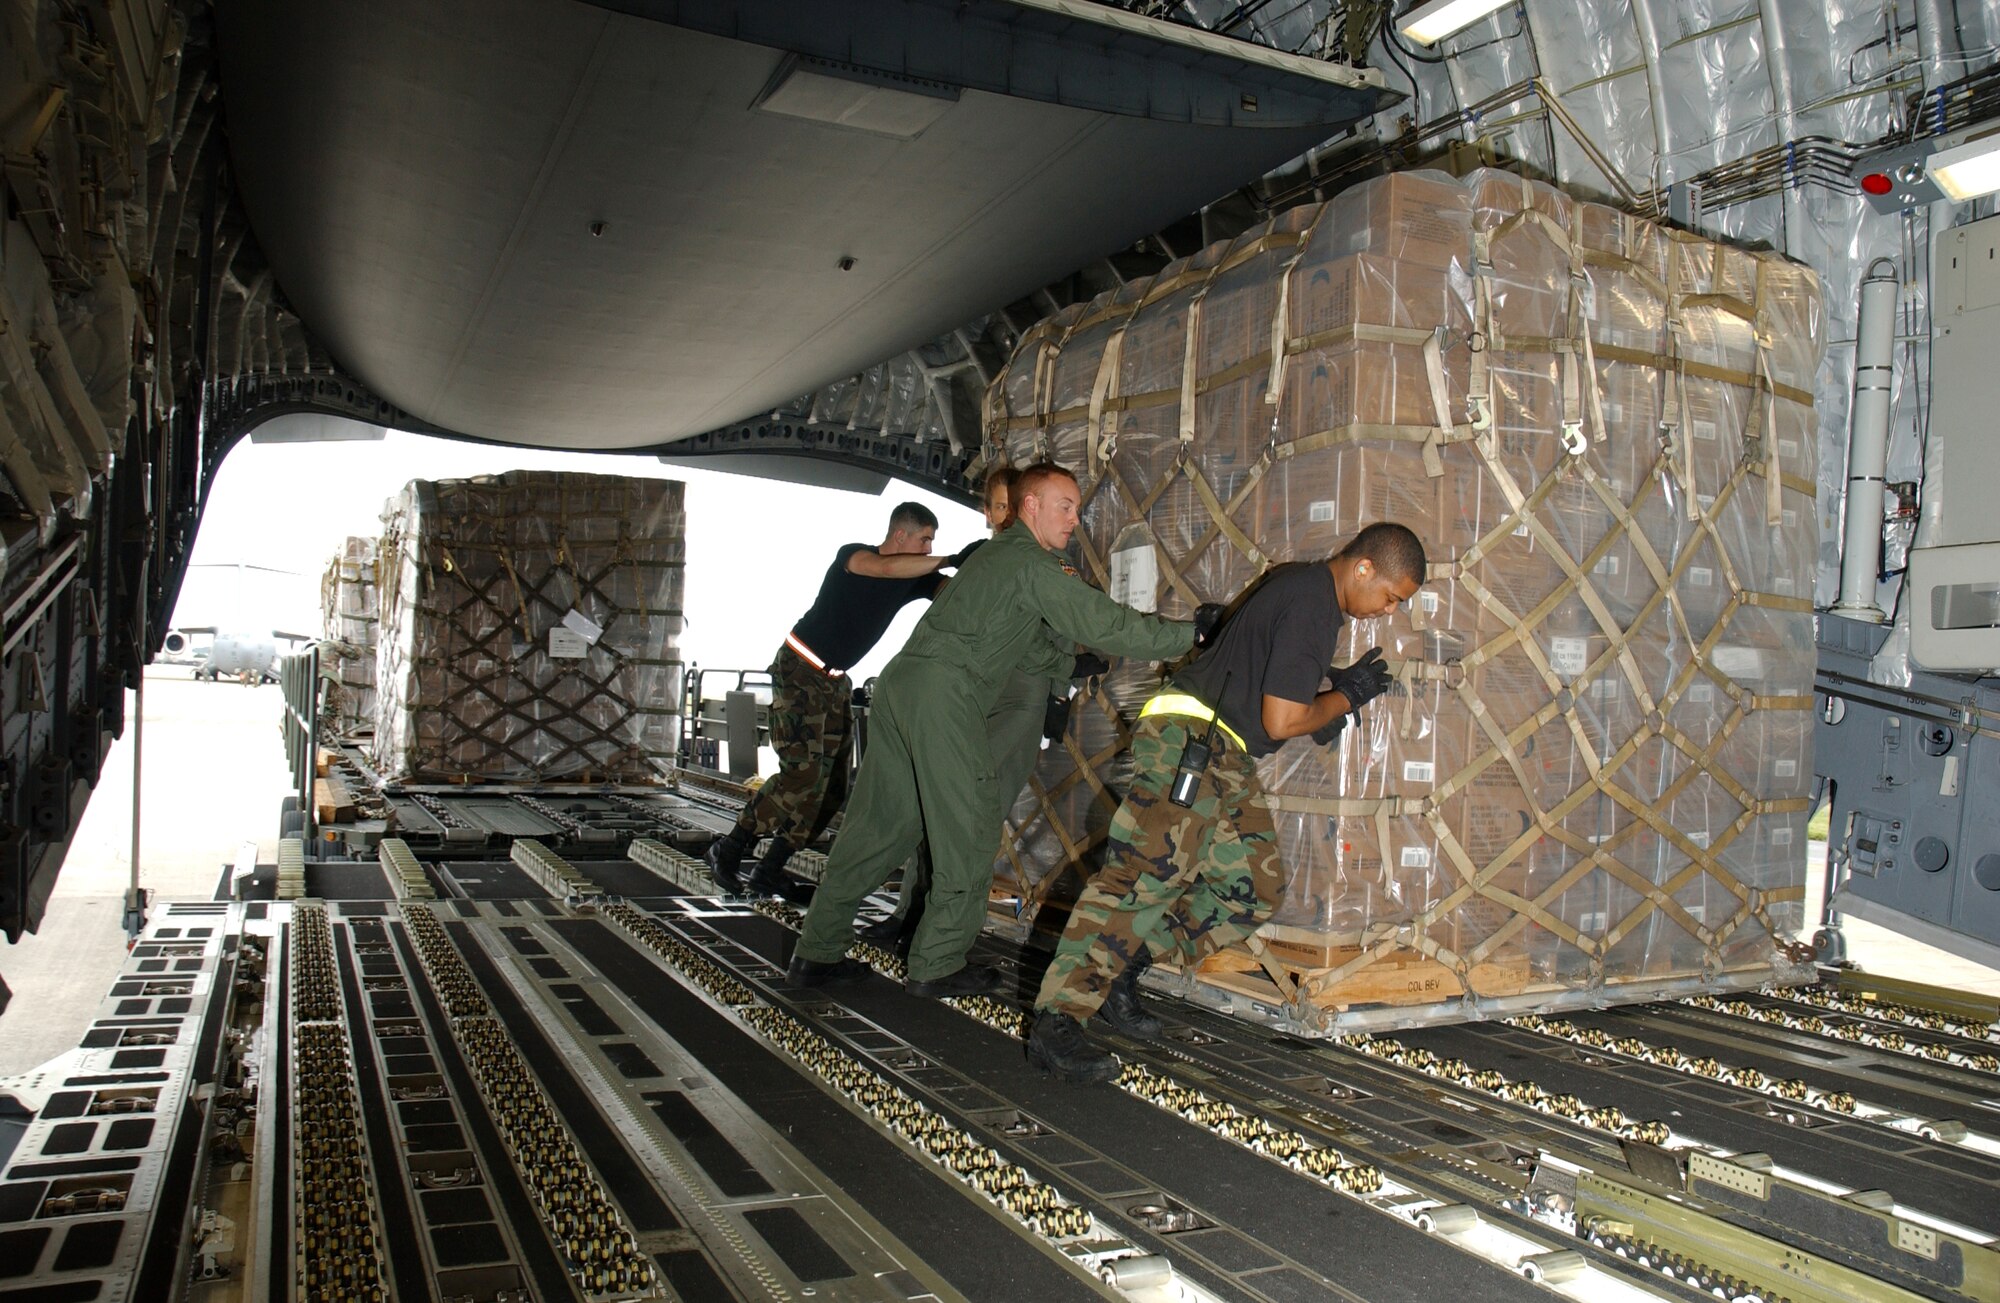 KADENA AIR BASE, Okinawa - Airmen from the 733rd Air Mobility Squadron here at Kadena and 15th Airlift Wing at Hickam Air Force Base, Hawaii, load food, cold weather gear and medical supplies onto a C-17 Globemaster III Feb. 8 bound for China. Recently, 19 Chinese provinces experienced the most severe winter storms in 50 years, imposing severe hardships on millions of Chinese citizens. U.S. Pacific Command coordinated the delivery of the humanitarian supplies to People’s Liberation Army at Shanghai International Airport, China. (U.S. Air Force Photo/Senior Airman Jeremy McGuffin)  